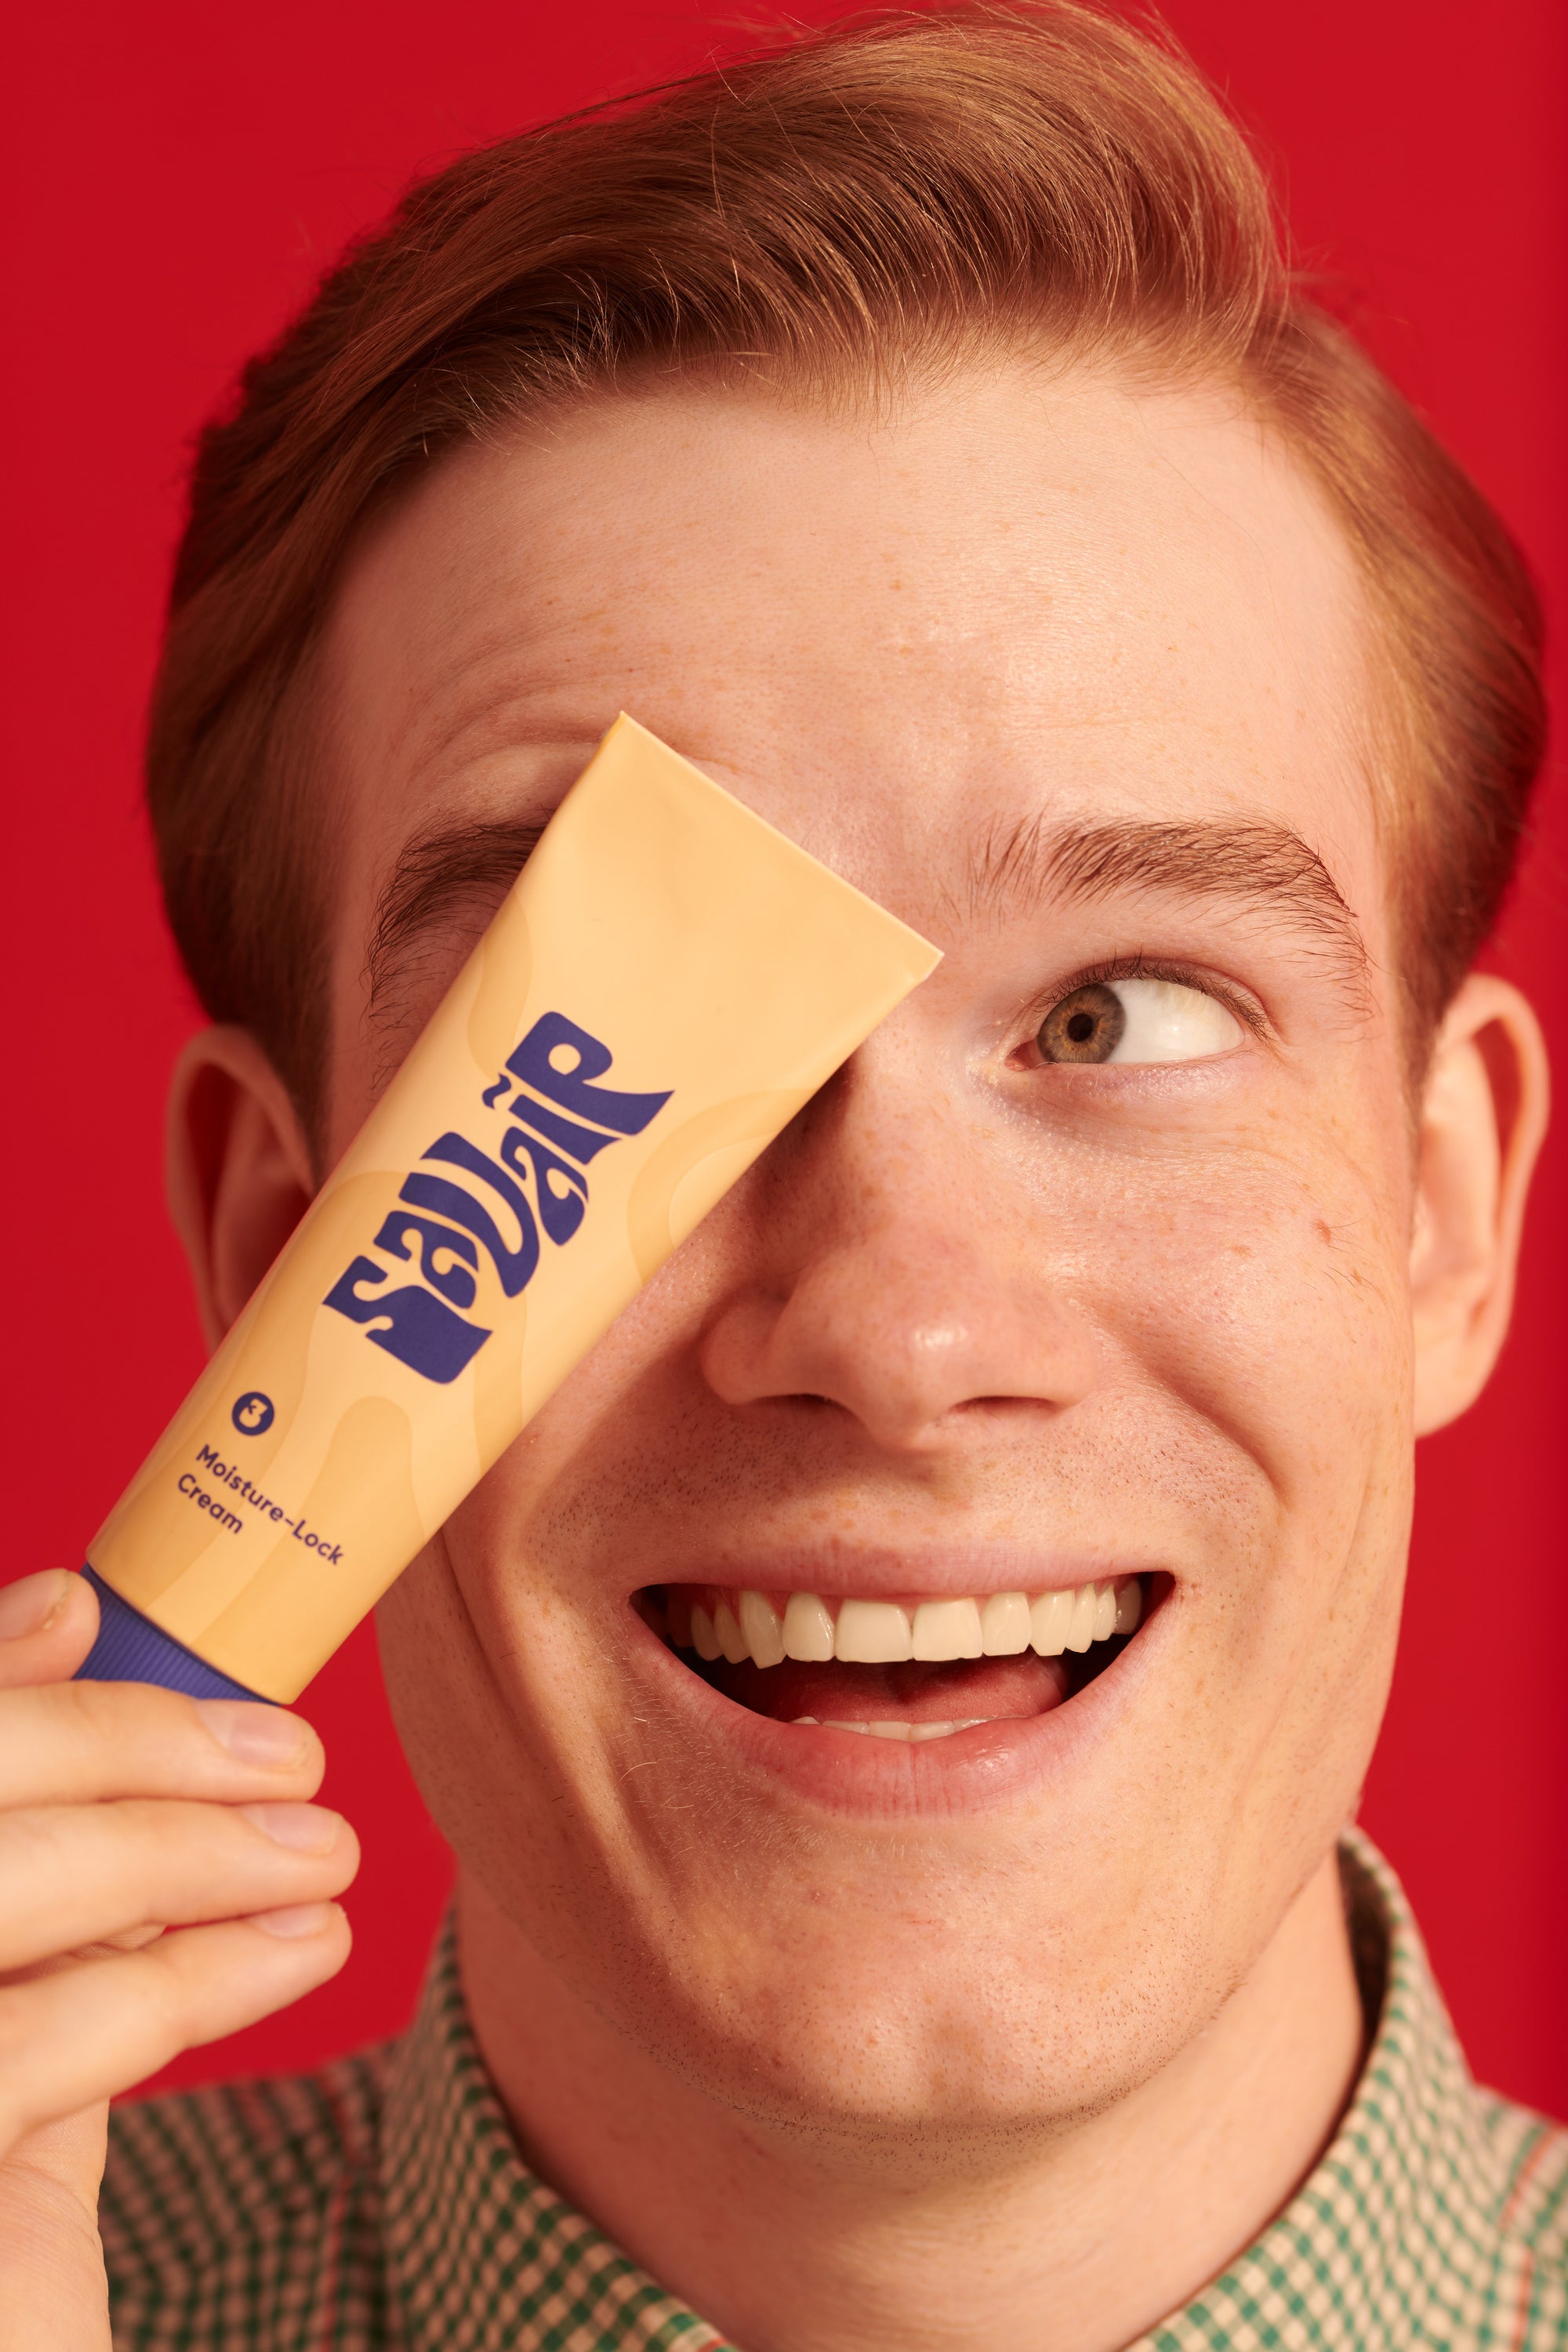 A young man with red hair smiling and holding up a yellow tube of Savaip Moisture-Lock Cream against a red background.